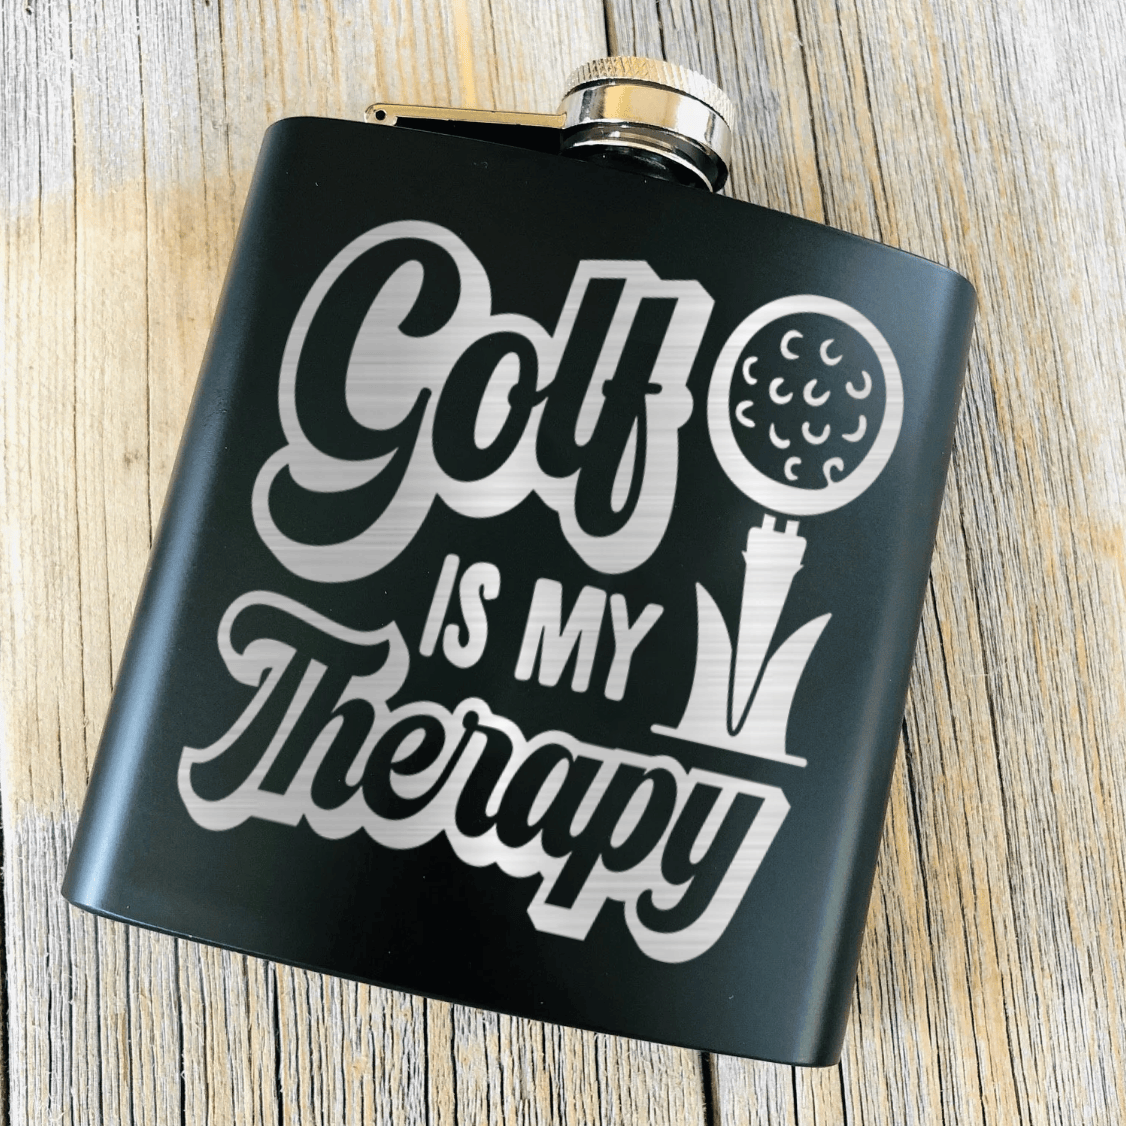 Golf Is My Therapy Flask